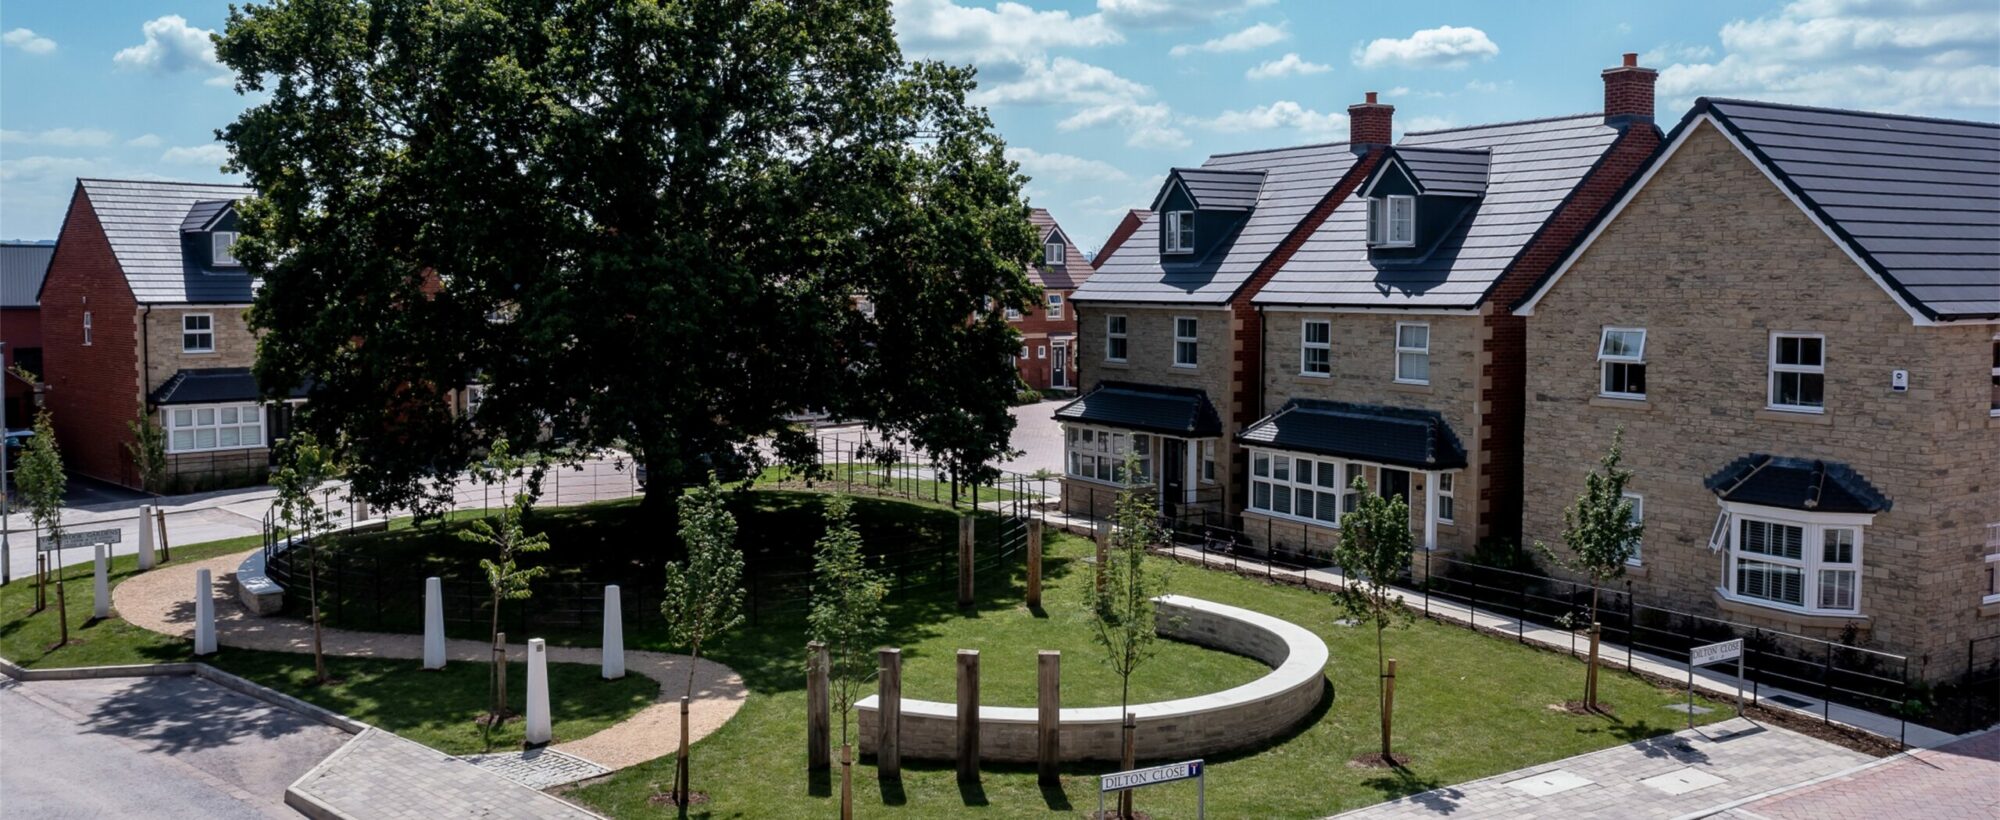 Central open space at the heart of the development at Newland Place in Trowbridge